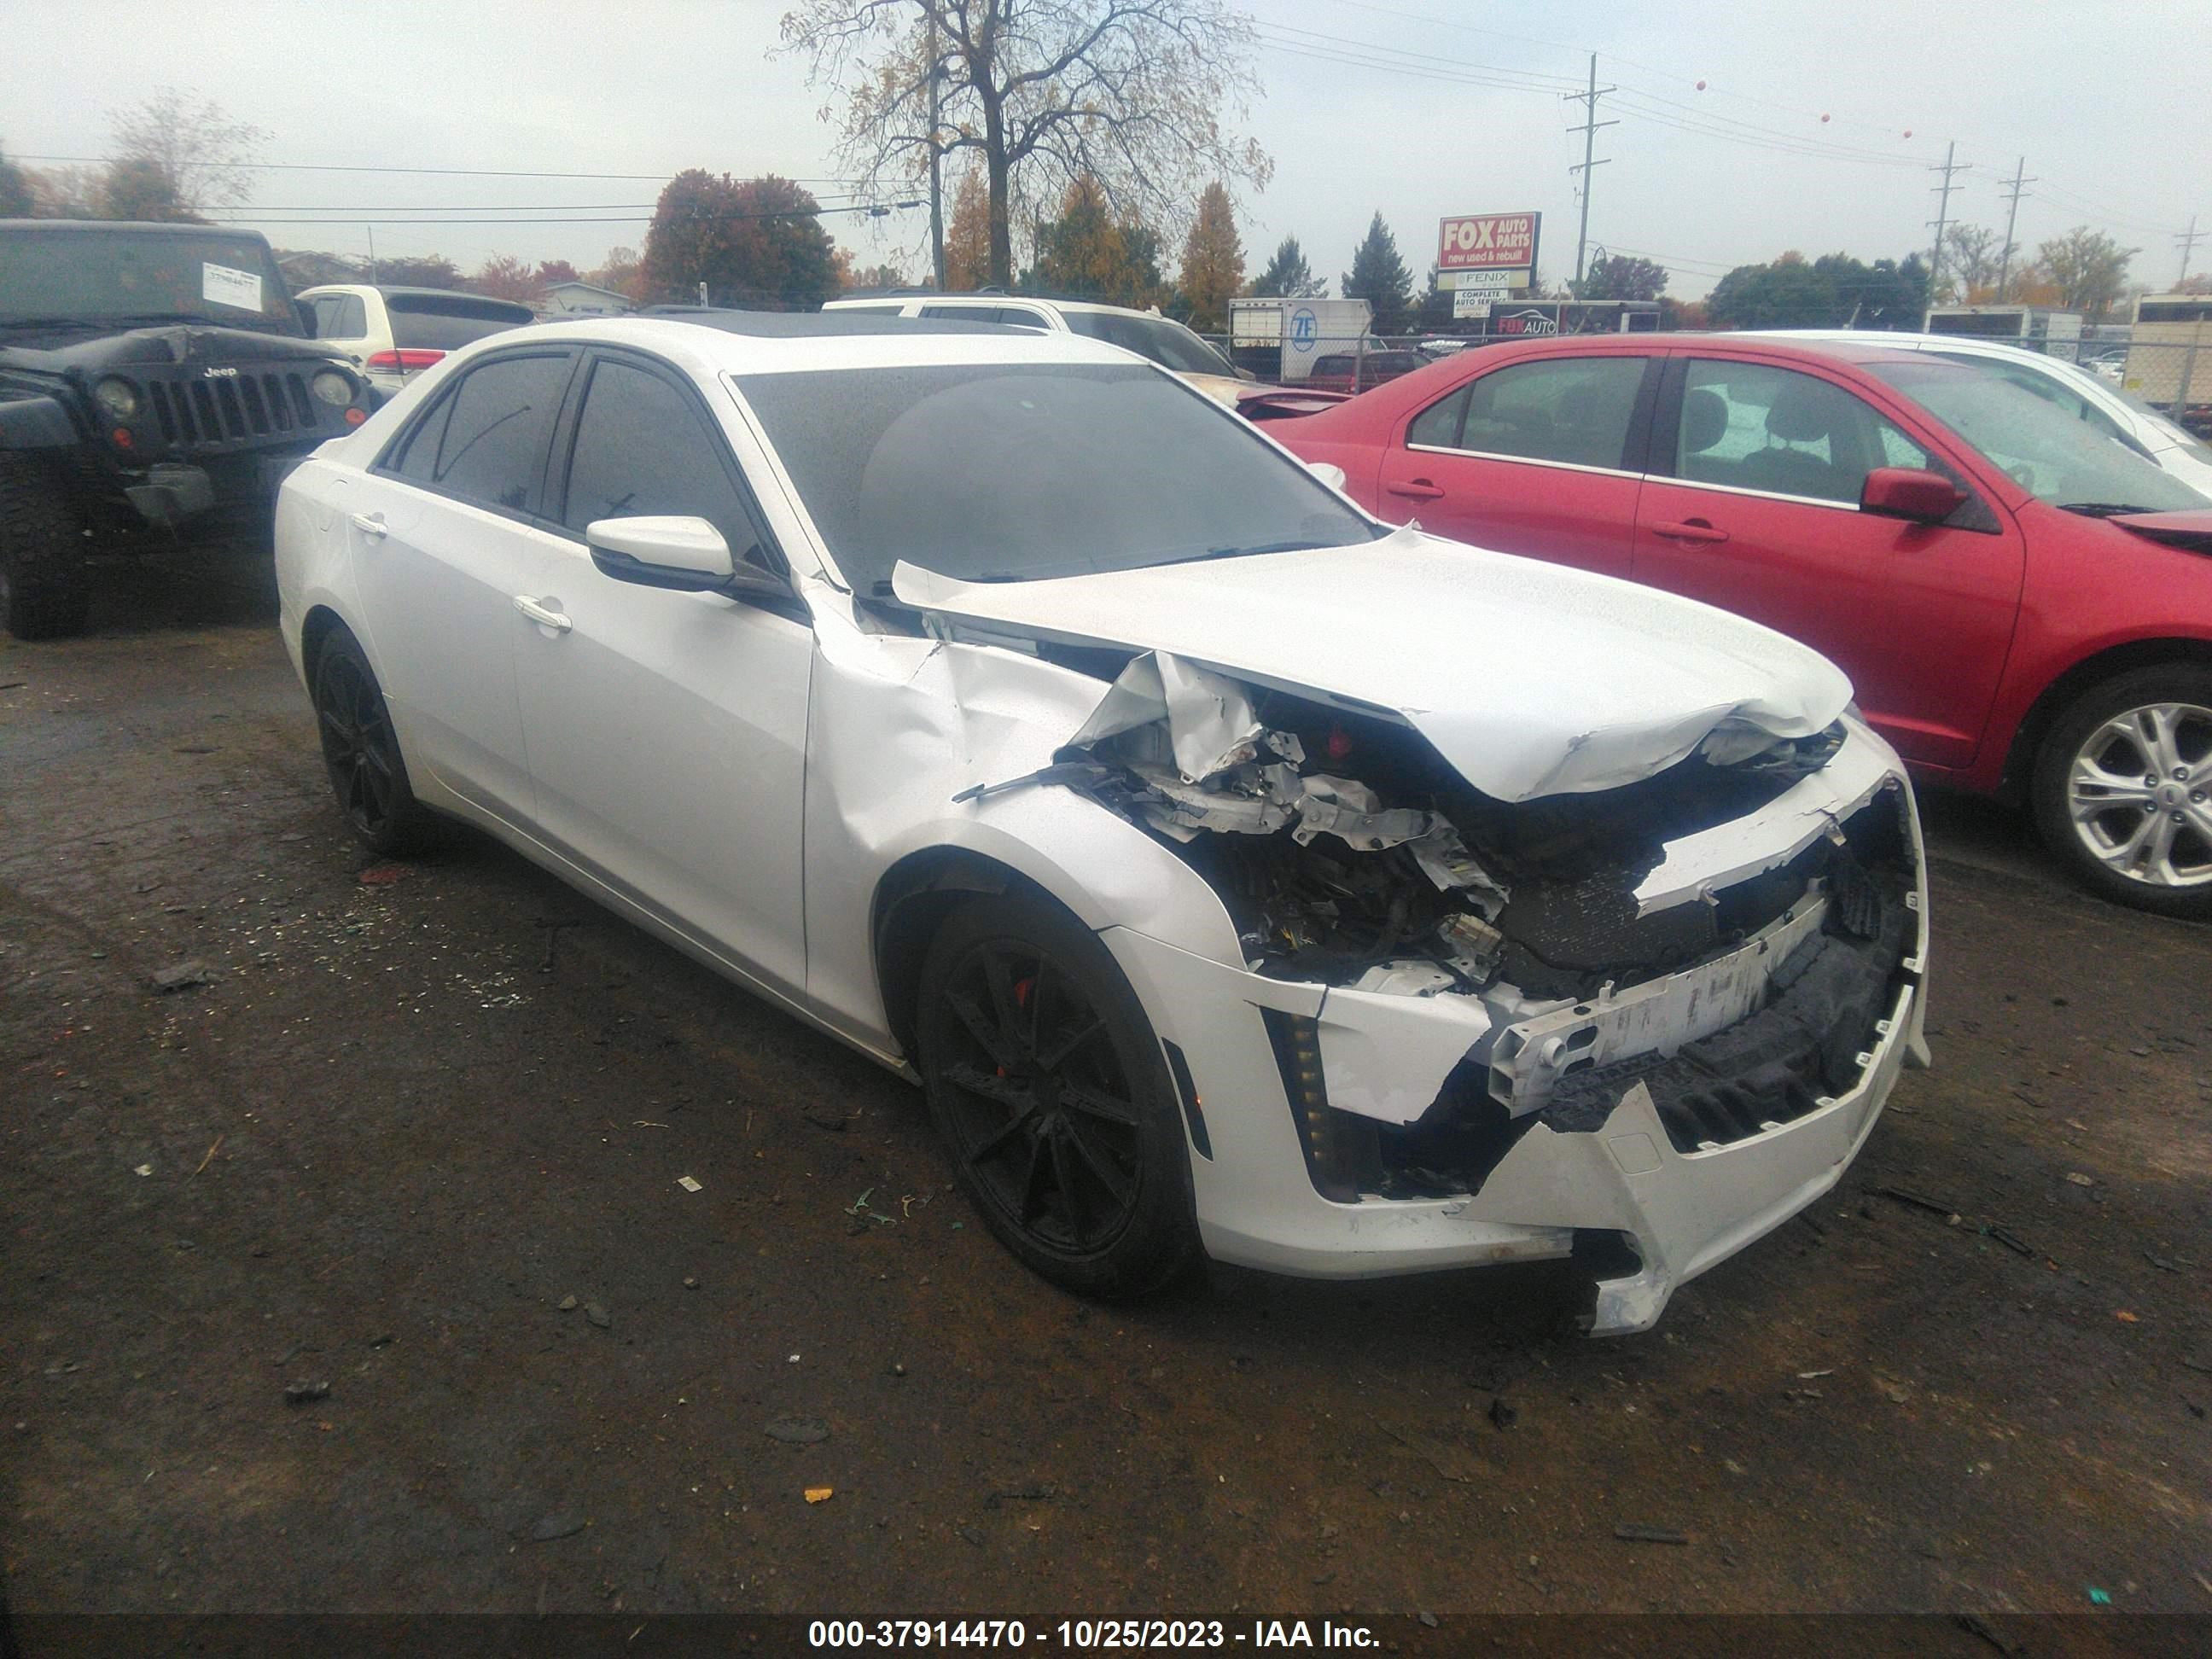 VIN: 1G6AW5SX8H0169787 - cadillac cts